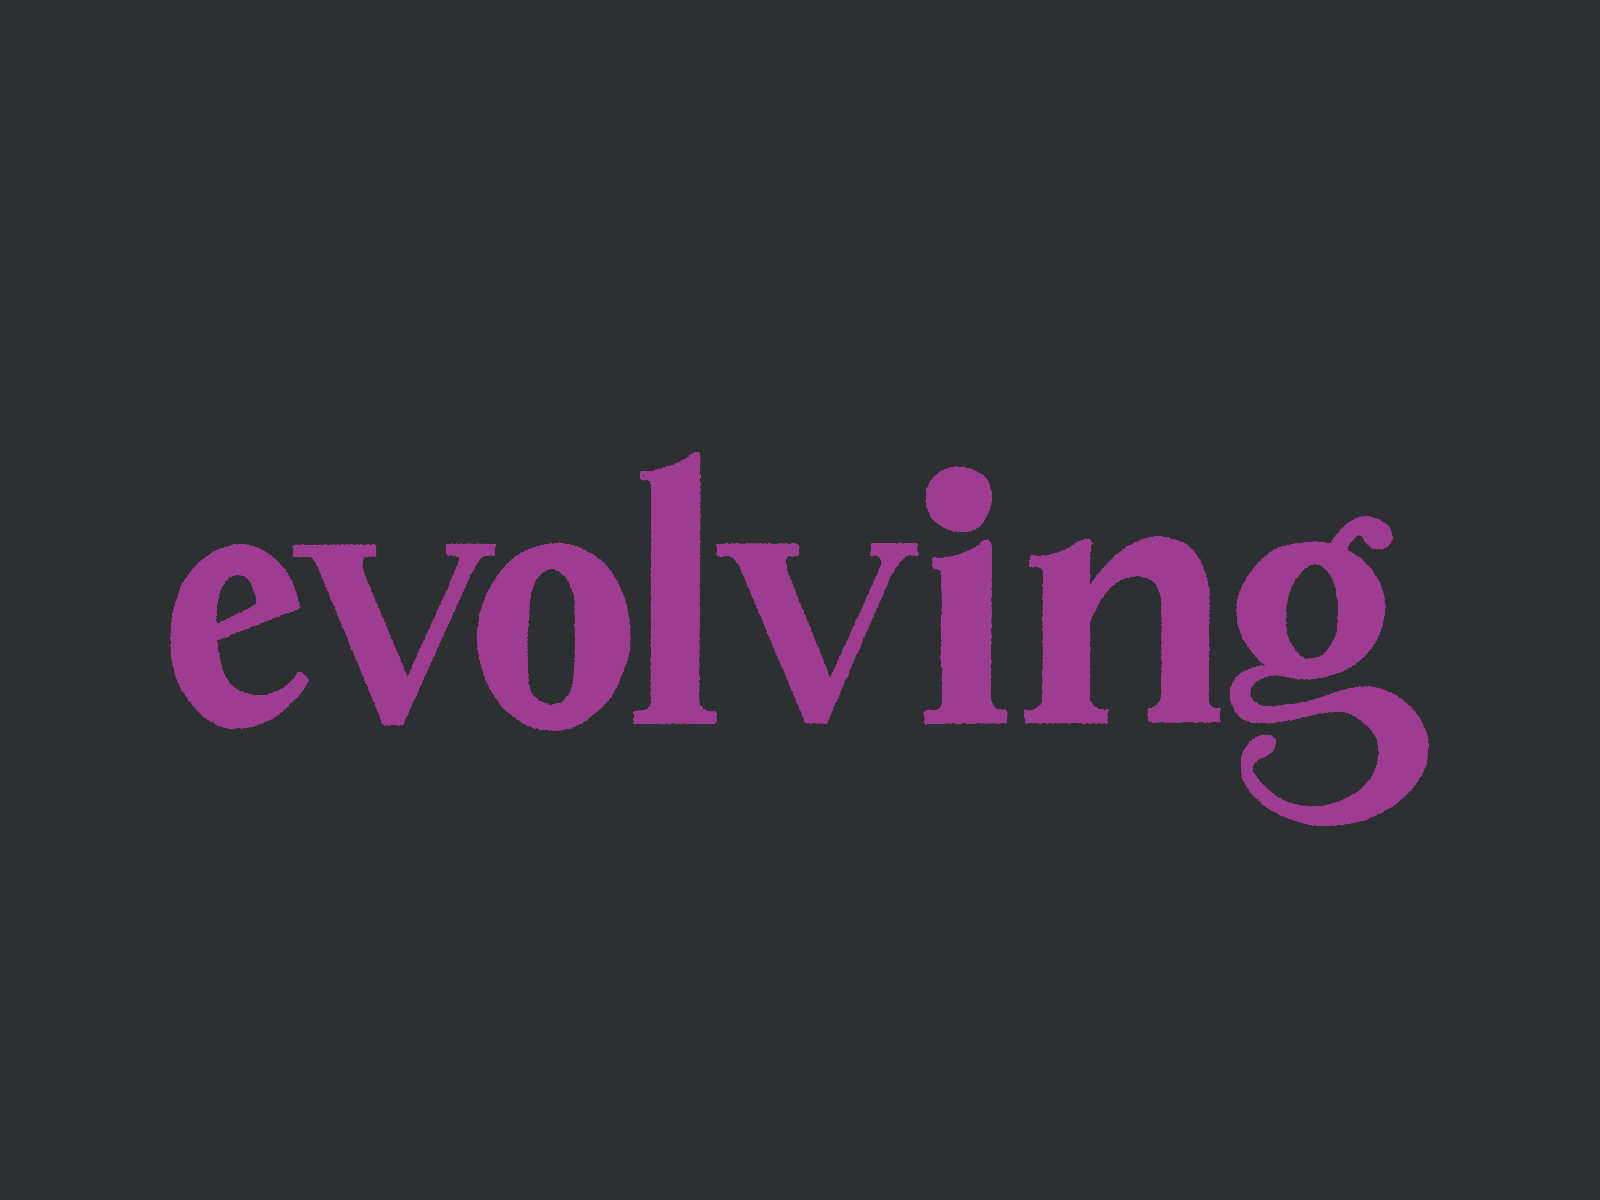 Evolving Letterforms animation animation 2d cel animation frame by frame hand drawn lettering hand drawn type hand lettered hand lettering illustration lettering motion graphics